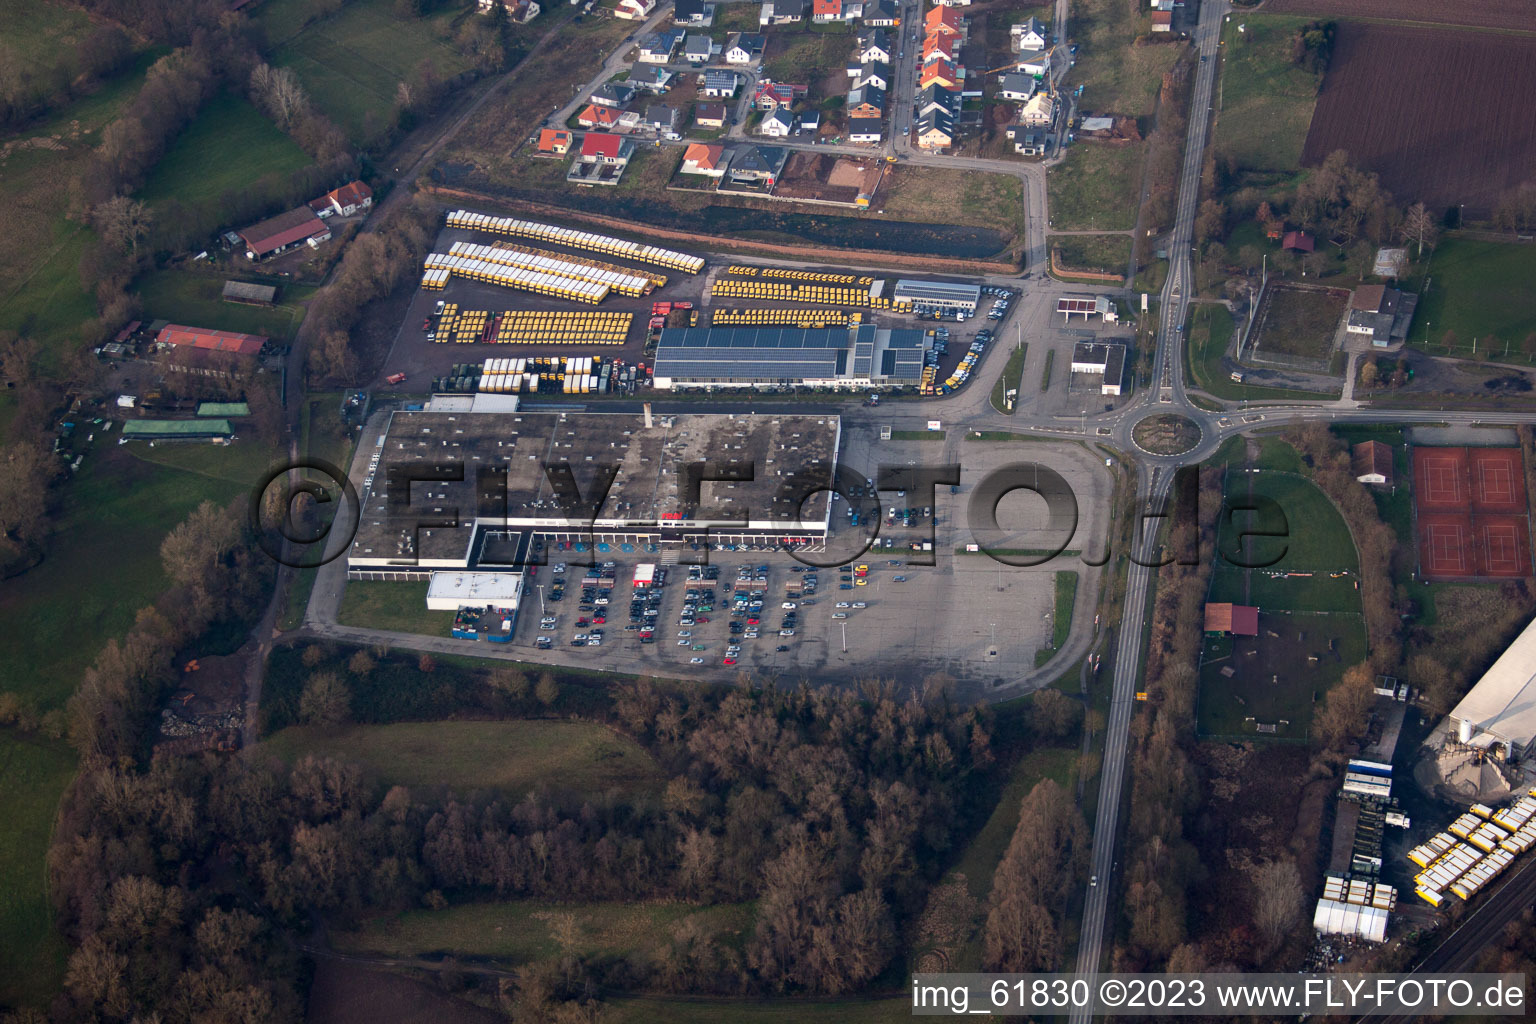 Industrial Estate in Rohrbach in the state Rhineland-Palatinate, Germany from the plane